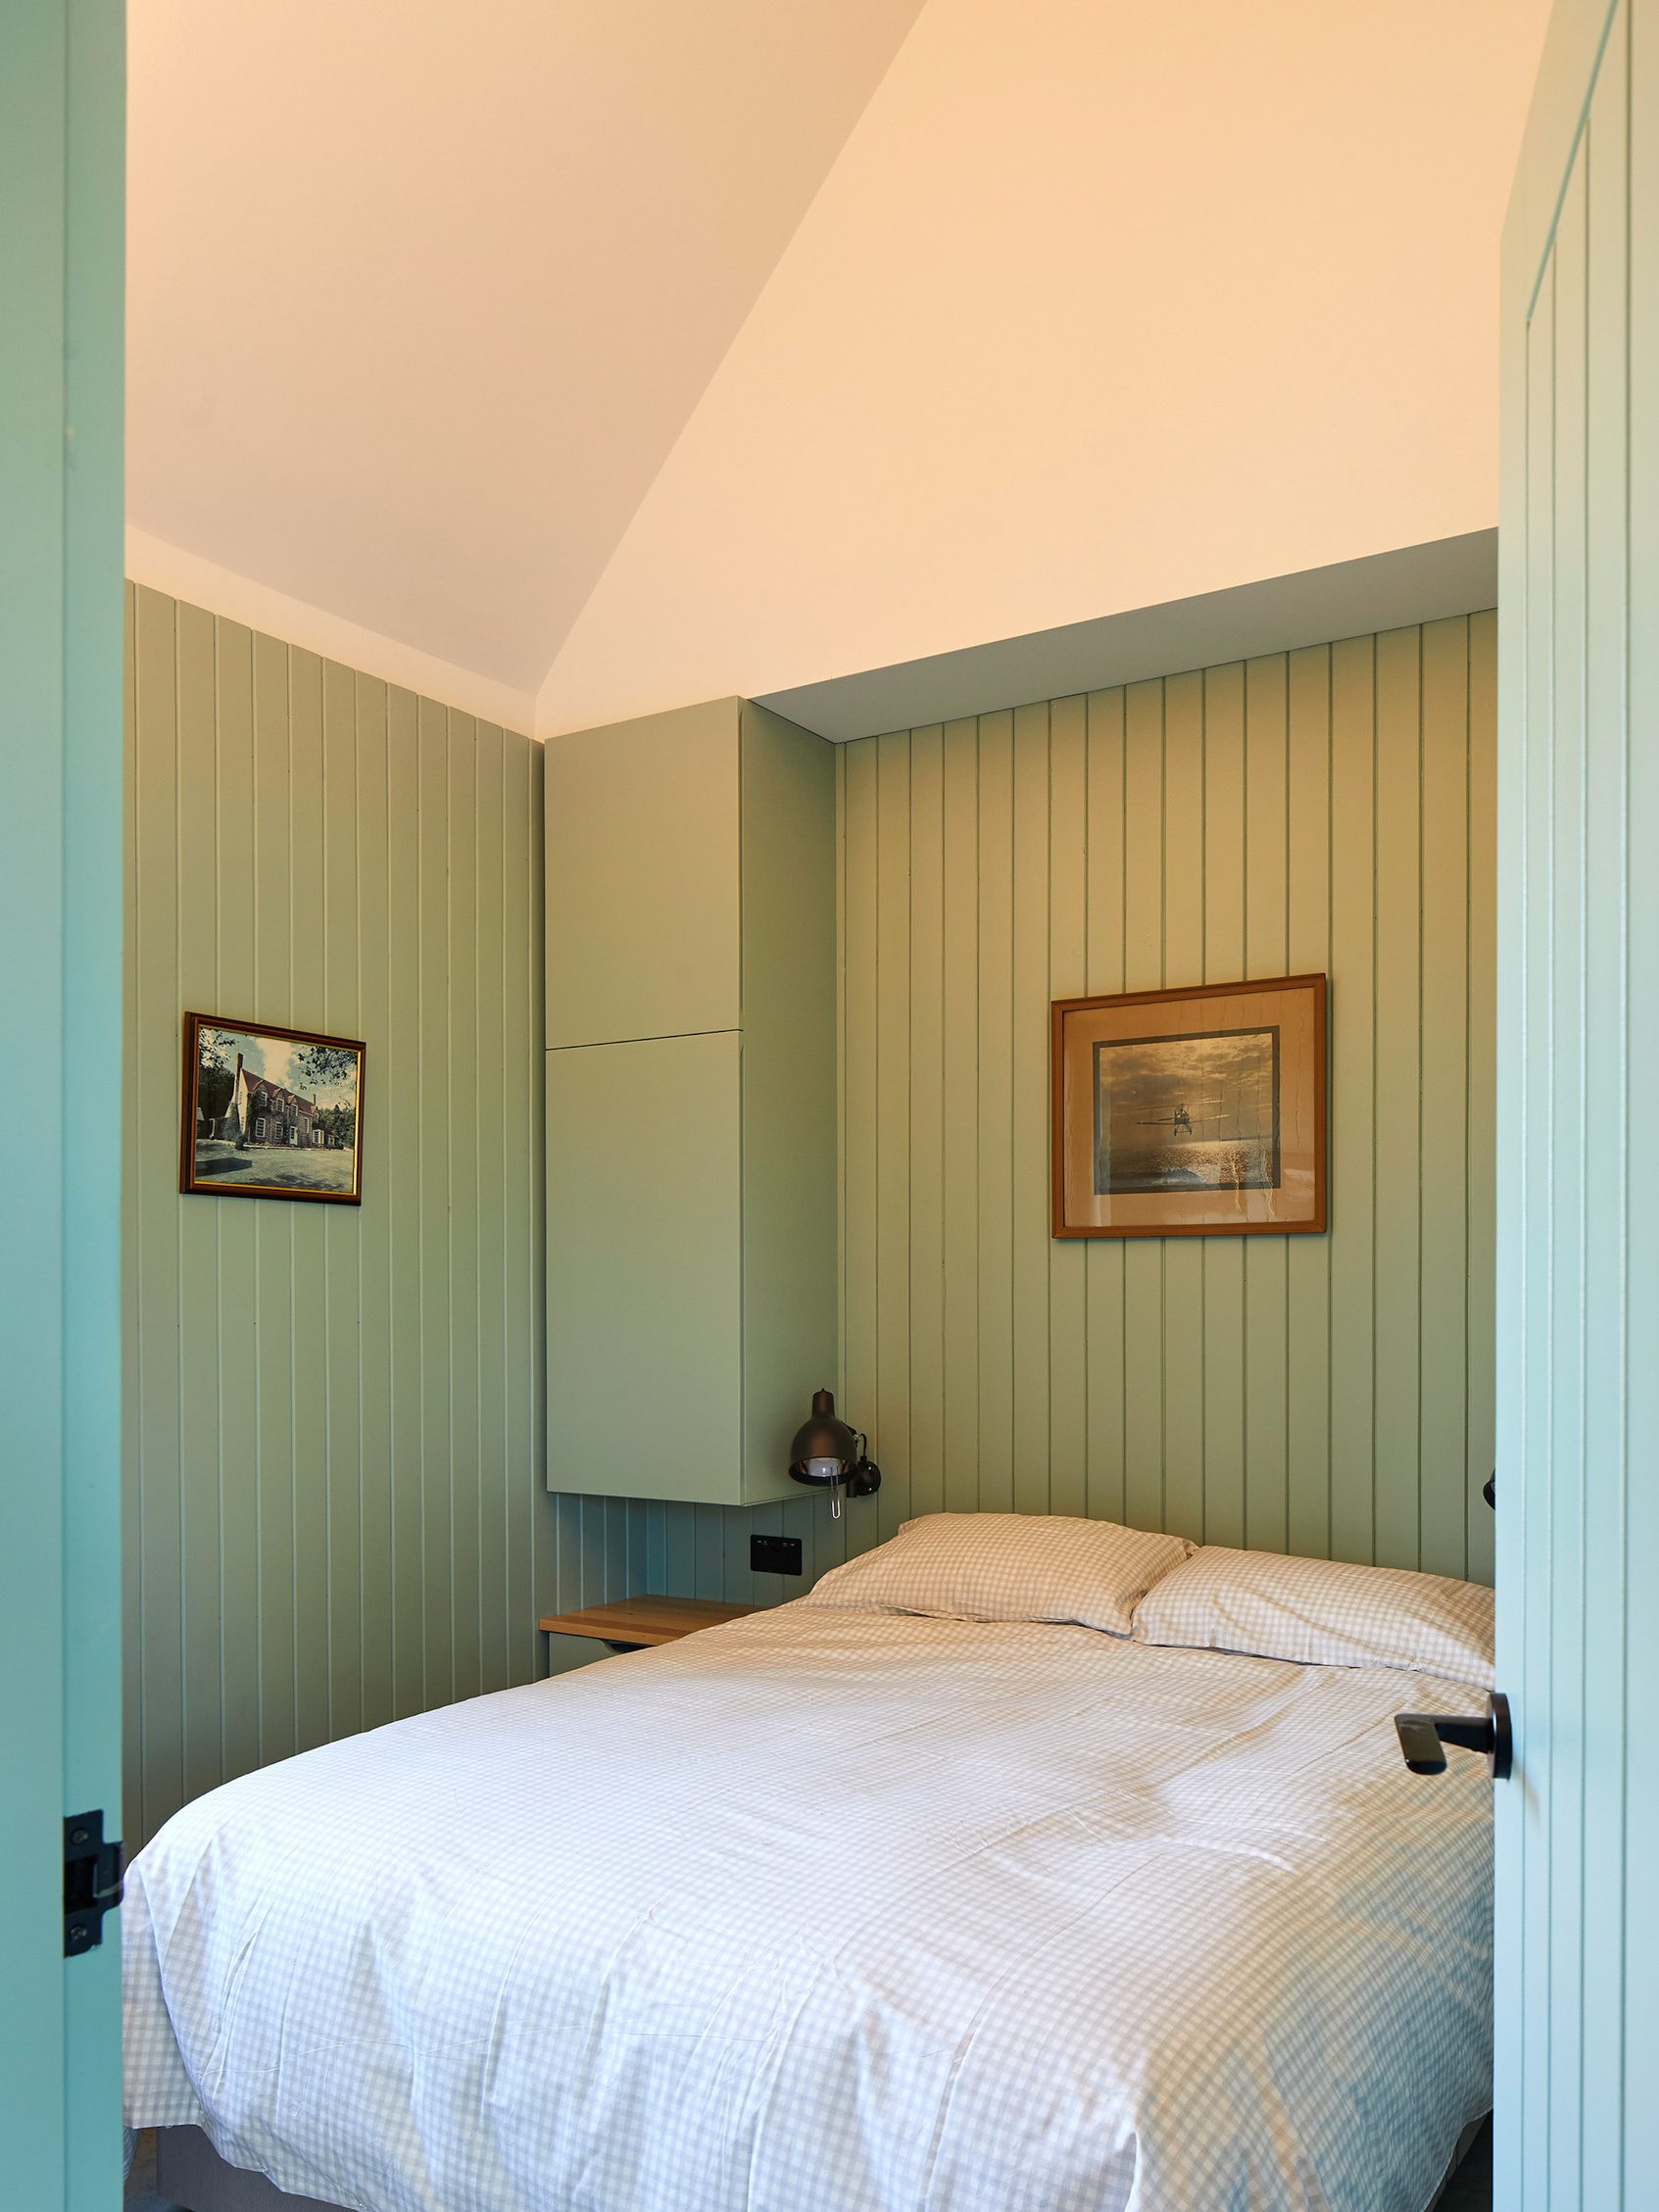 Pale green timber wall panels in bedroom | cdc studio cambridge architects